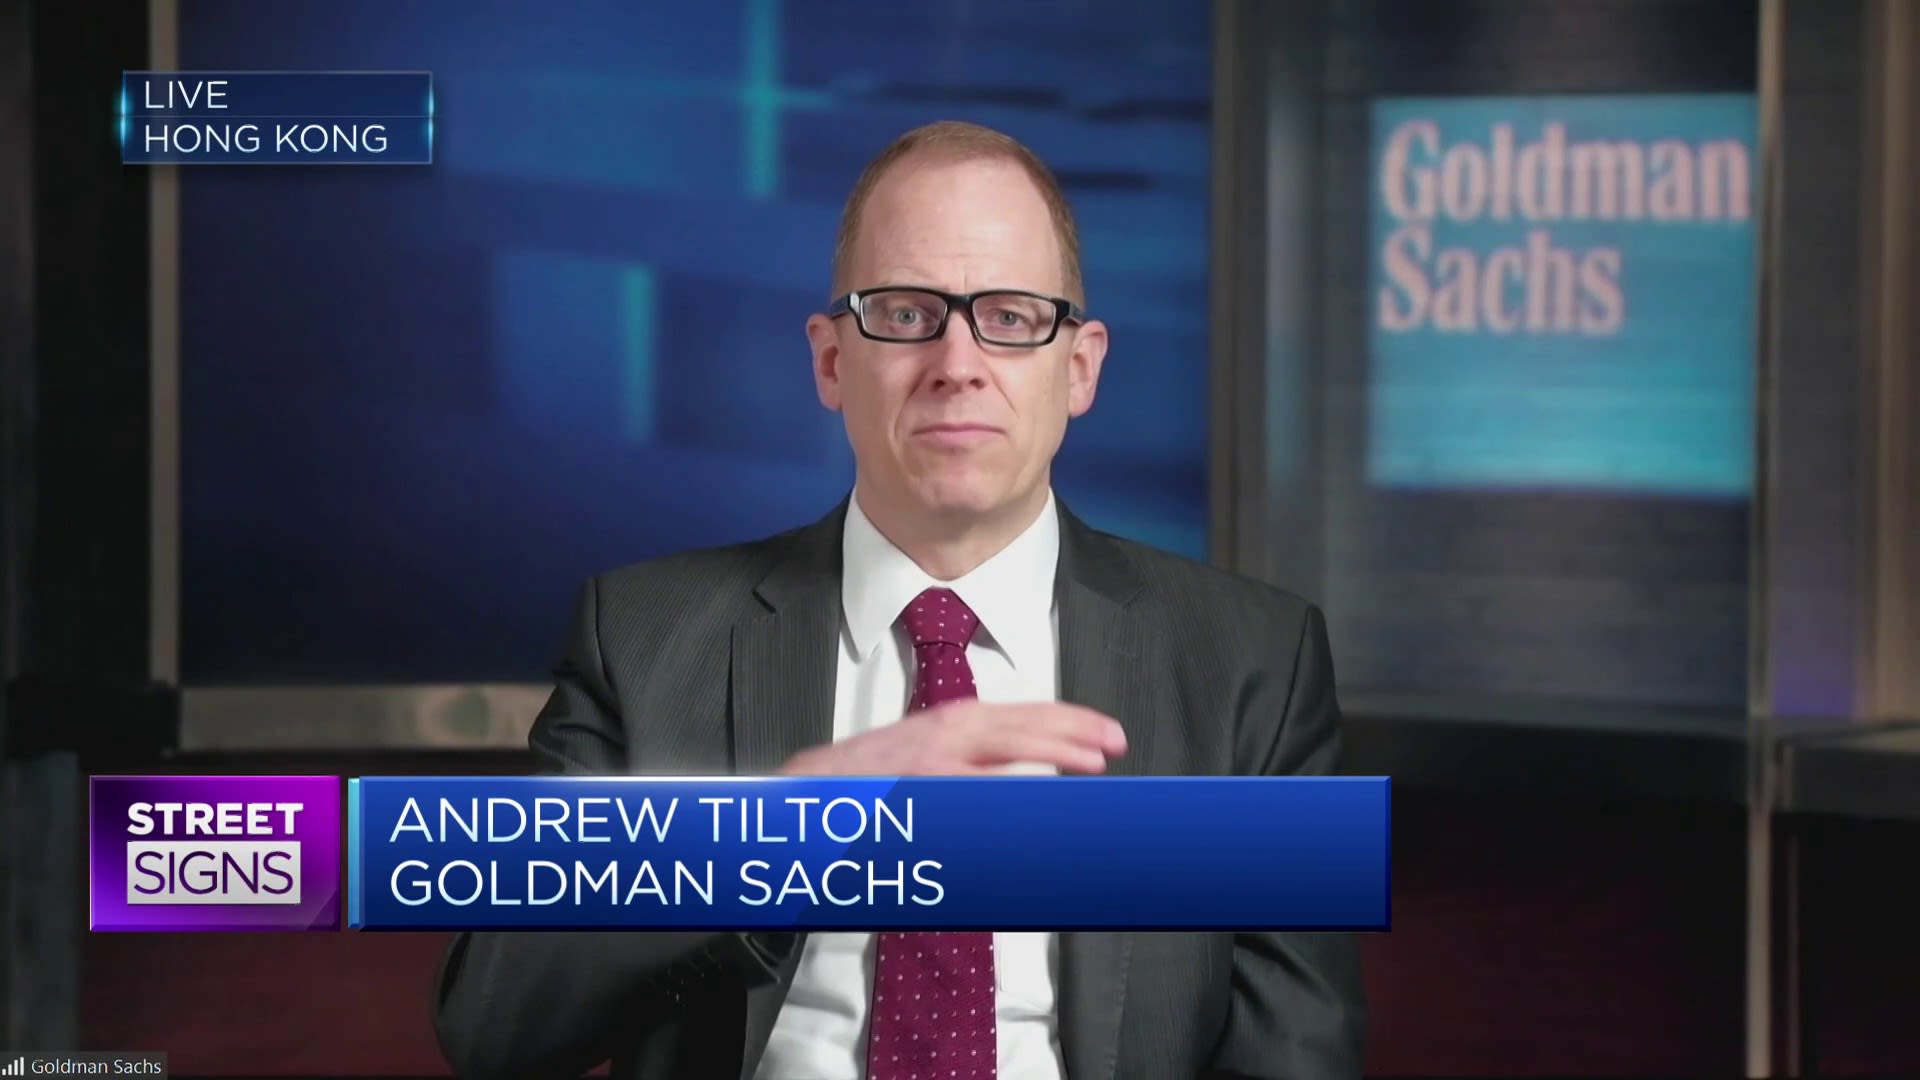 Goldman Sachs’ Andrew Tilton: China is ‘a tale of two economies’ [Video]